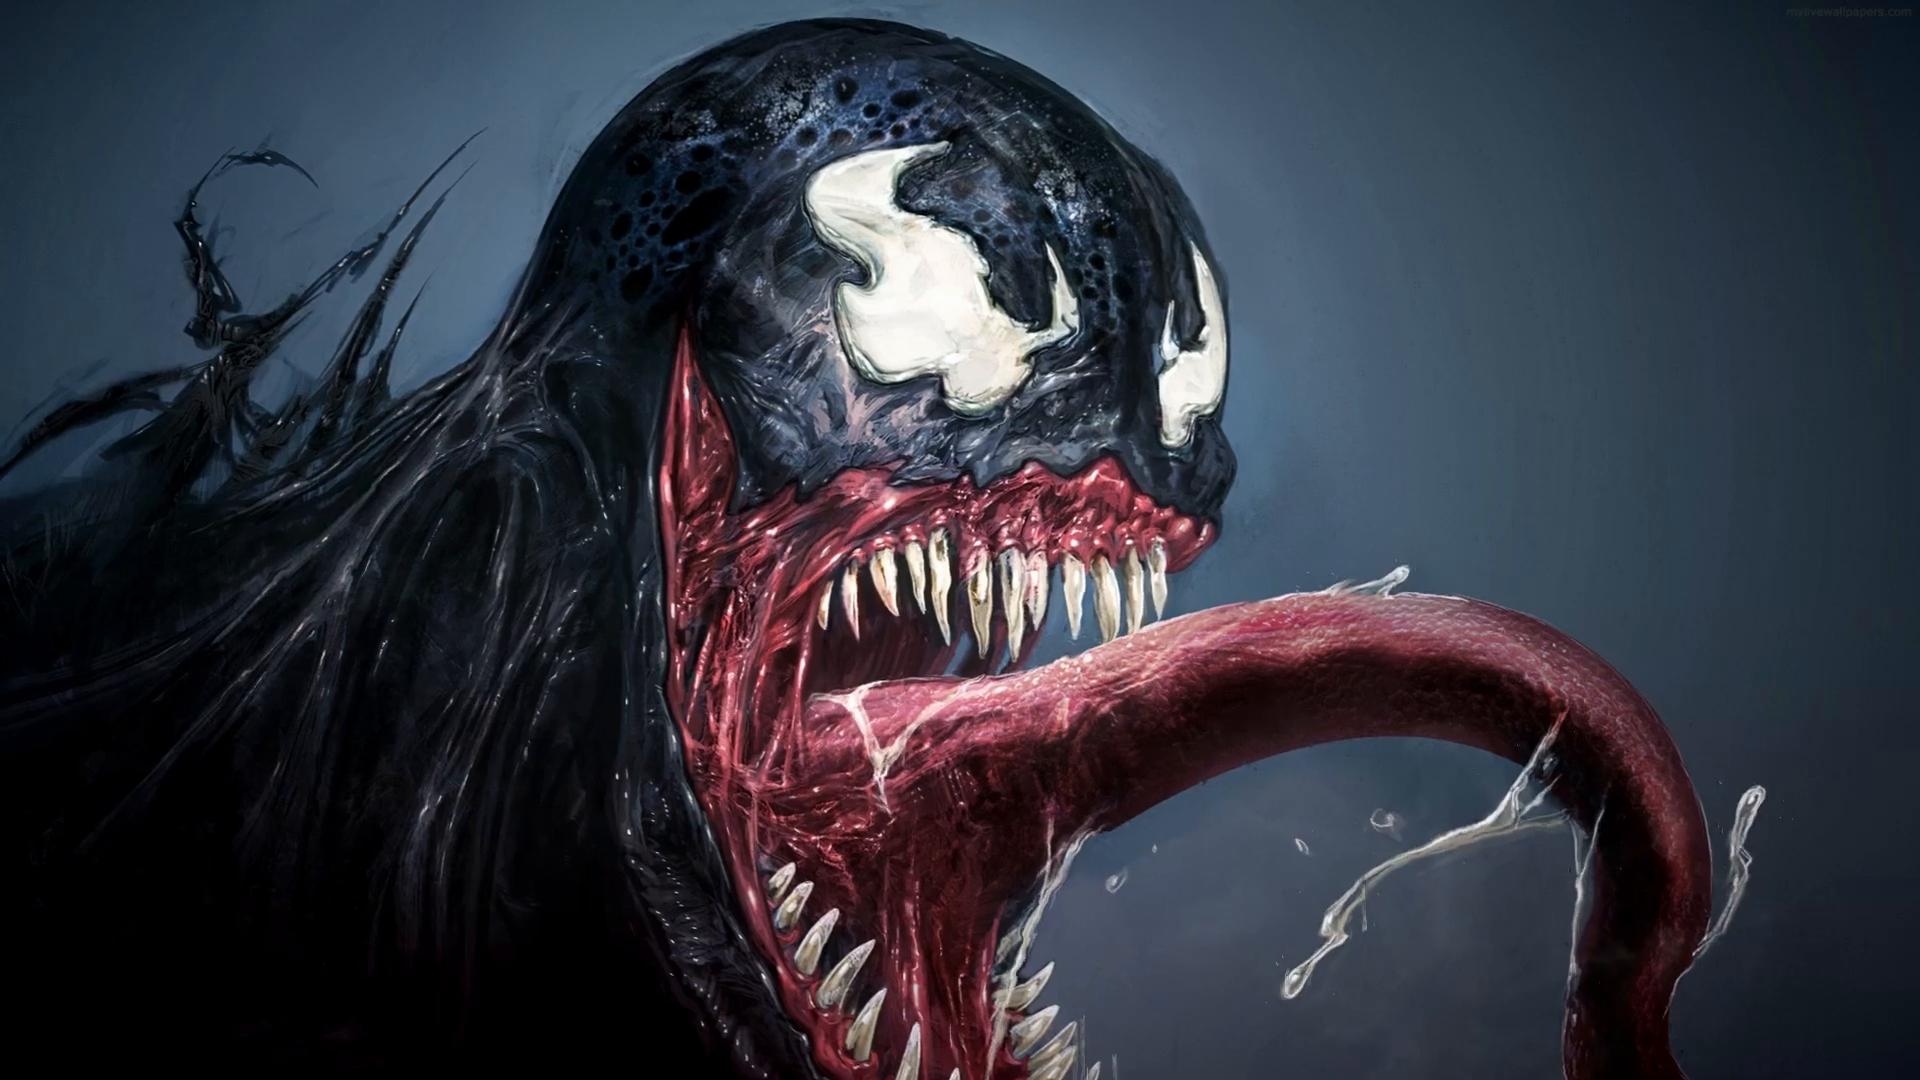 SpiderMan And Venom Wallpapers and Print Designs on Behance